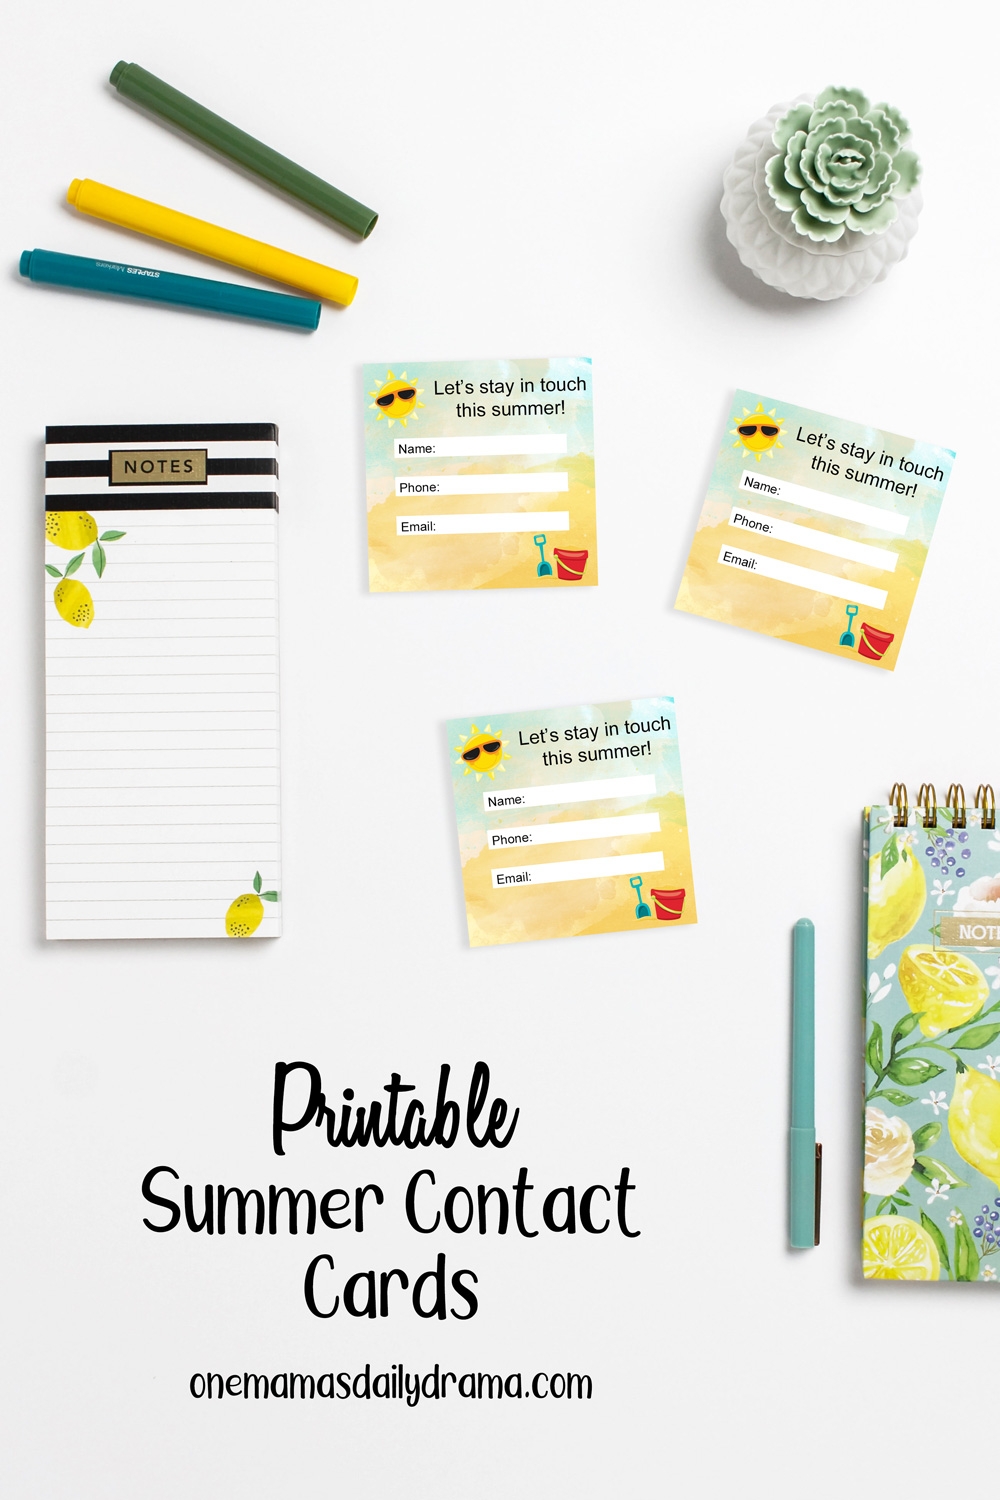 Printable Summer Contact Cards For Kids To Stay In Touch